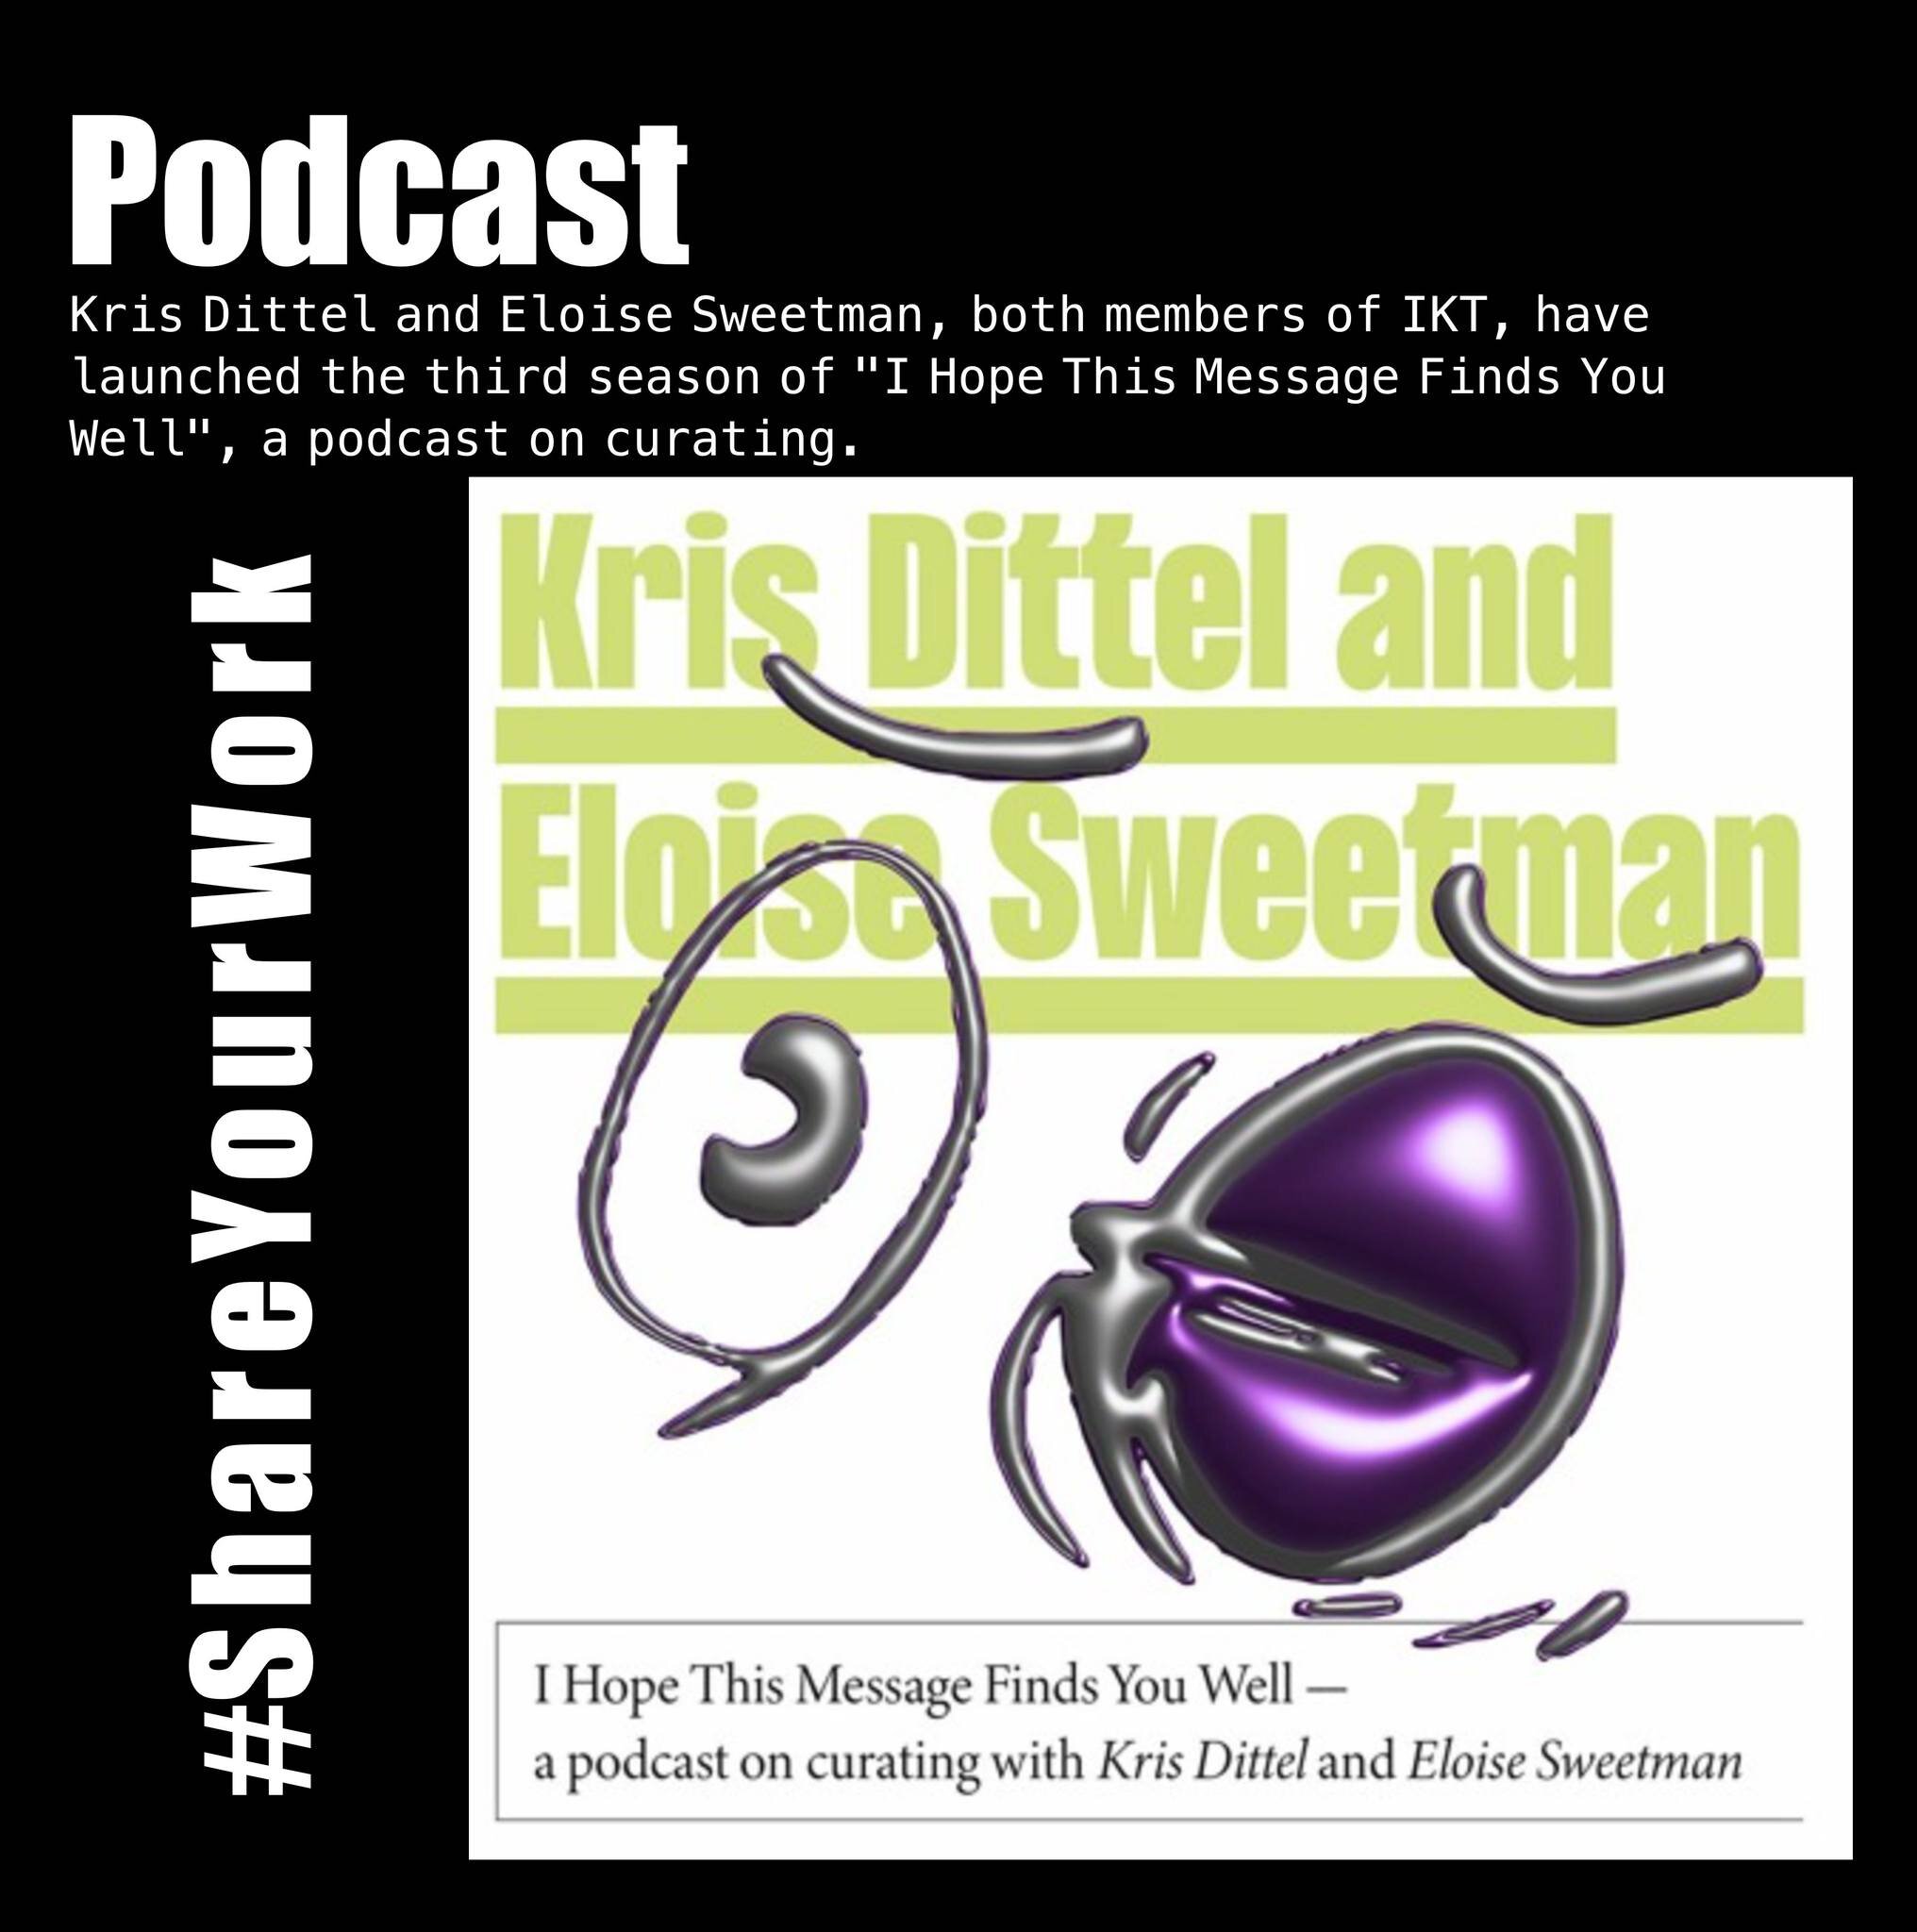 Kris Dittel @krisdittel and Eloise Sweetman @eloise_sweetman, both members of IKT, have launched the third season of I Hope This Message Finds You Well, a podcast on curating @ihopethismessage 

This season, they're diving into discussions about &quo